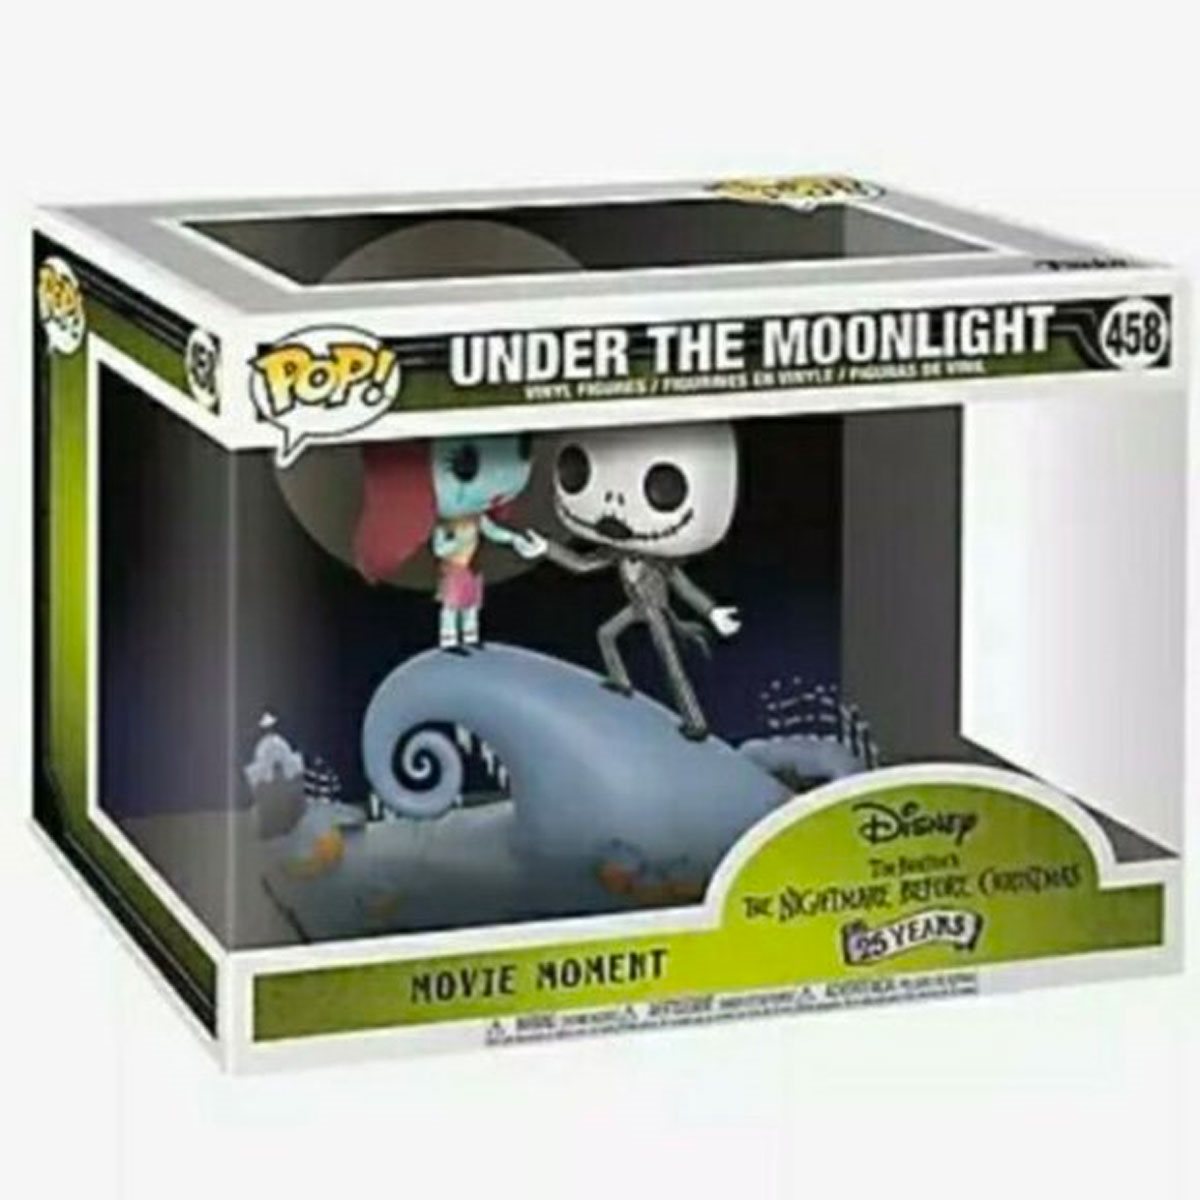 Nightmare Before Christmas Jack and Sally On The Hill Collectible Figure for sale online Movie Moment Funko POP 